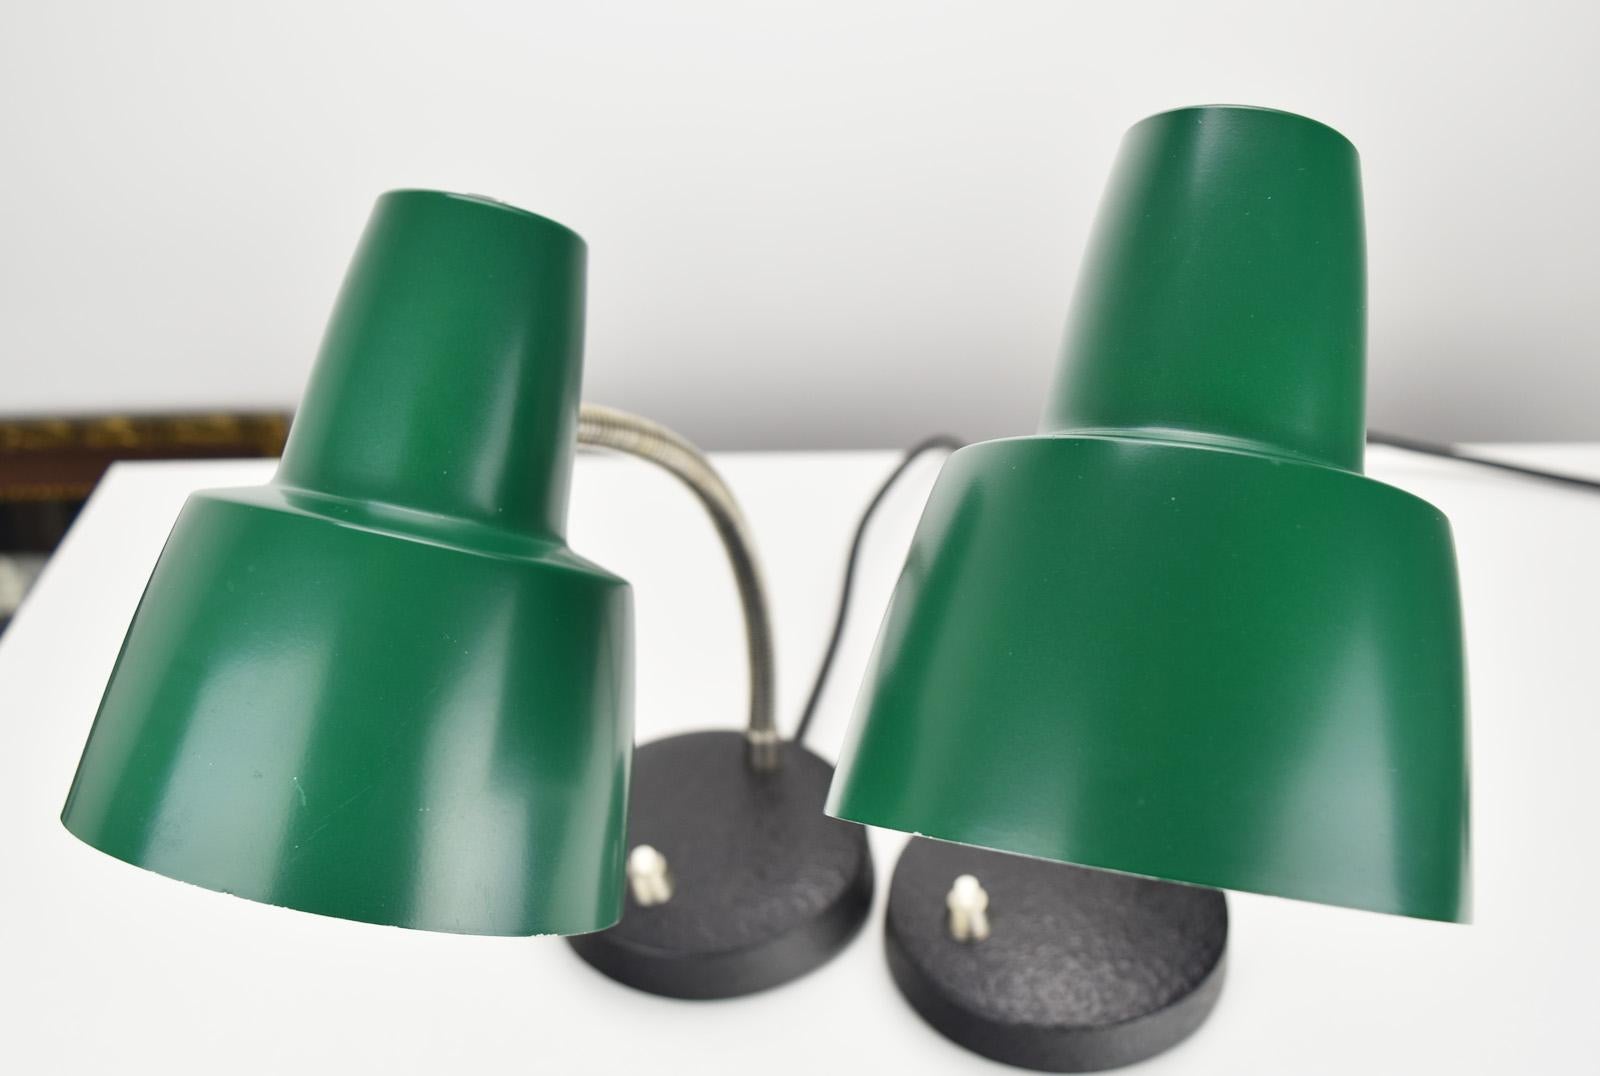 Mid-20th Century Vintage Pair of Bed Side Table Lamps by Hillebrand 1960s German Green Lacquered For Sale